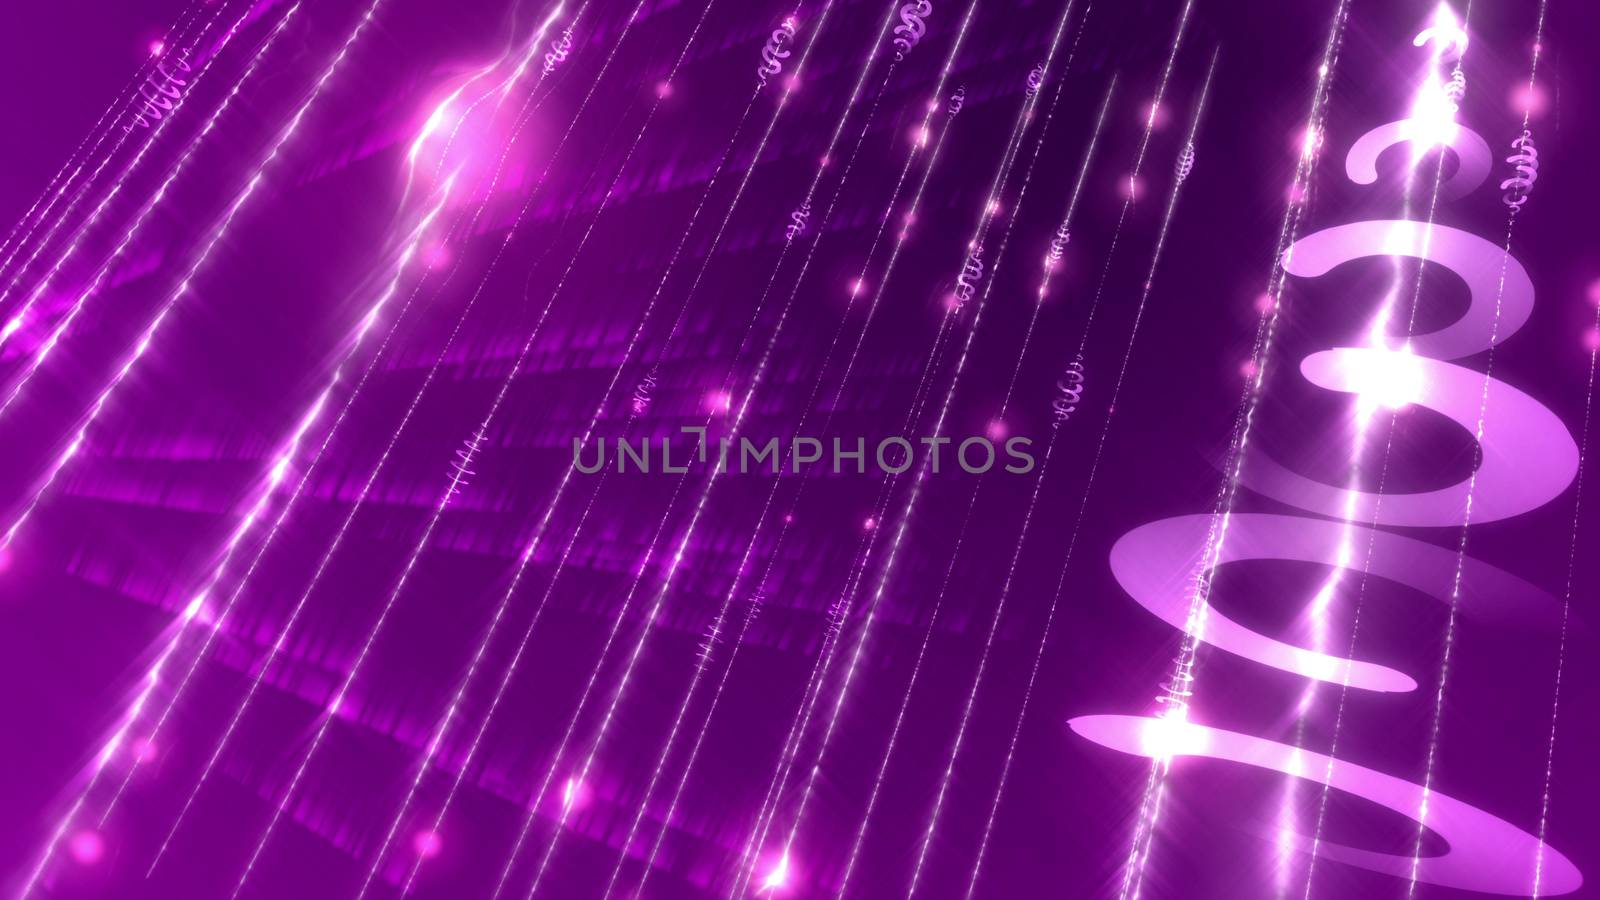 Holographic 3d illustration of a hi-tech cyberspace  with arcs, spirals, lines and dots connected in several dazzling networks shot diagonally  in the dark violet cyberspace background